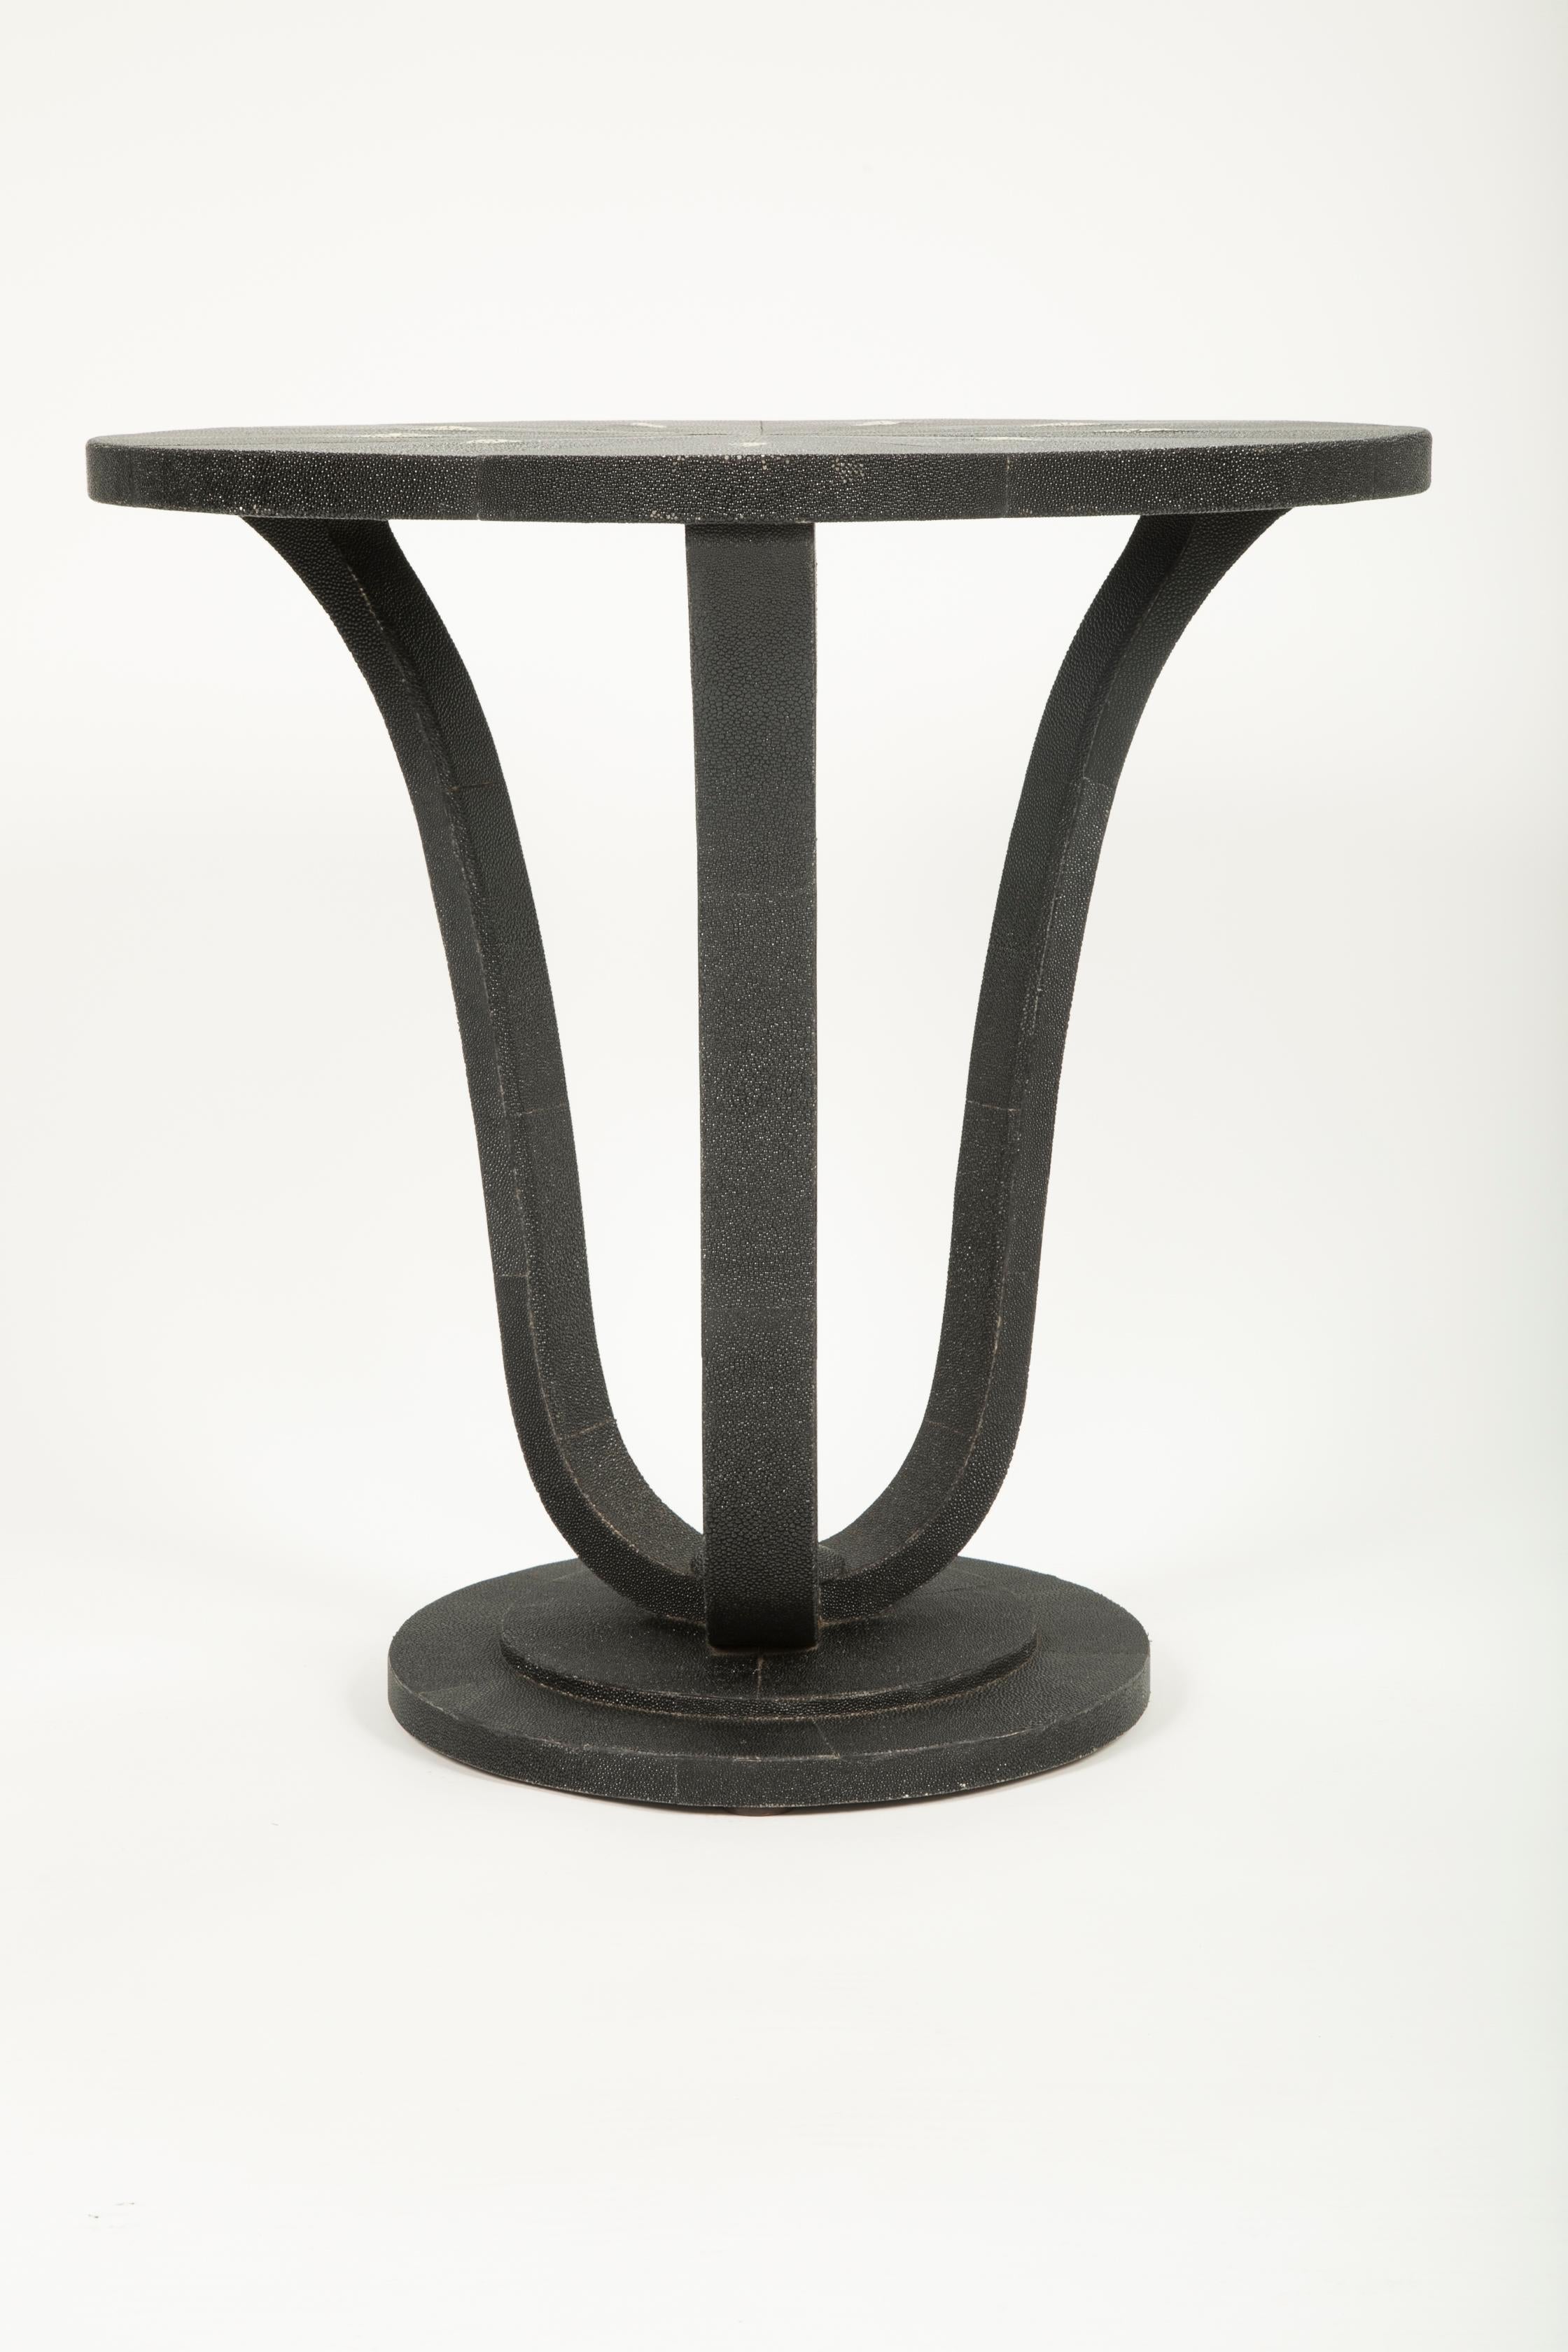 Art Deco Pair of English Black Shagreen Side Tables, Sold Individually